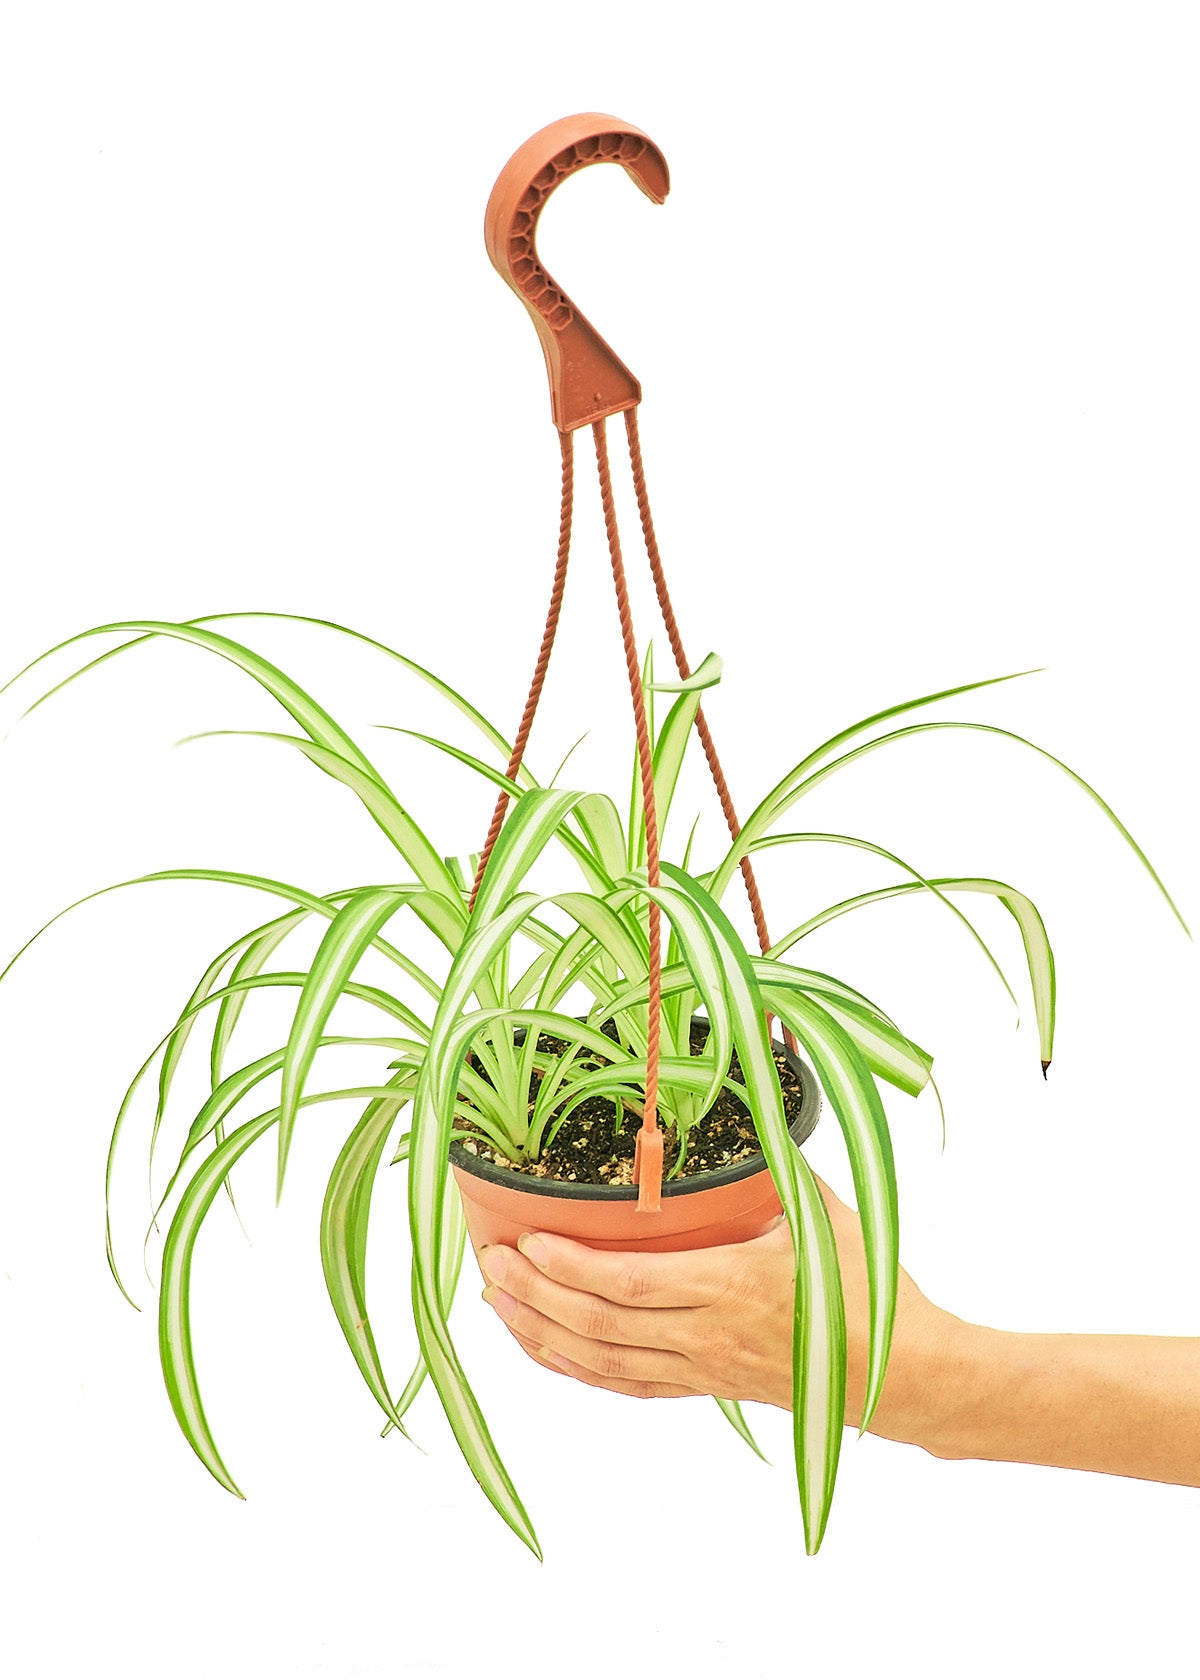 Medium size Spider Plant in a growers hanging basket with a white background and a hand holding the pot to show a slight top view